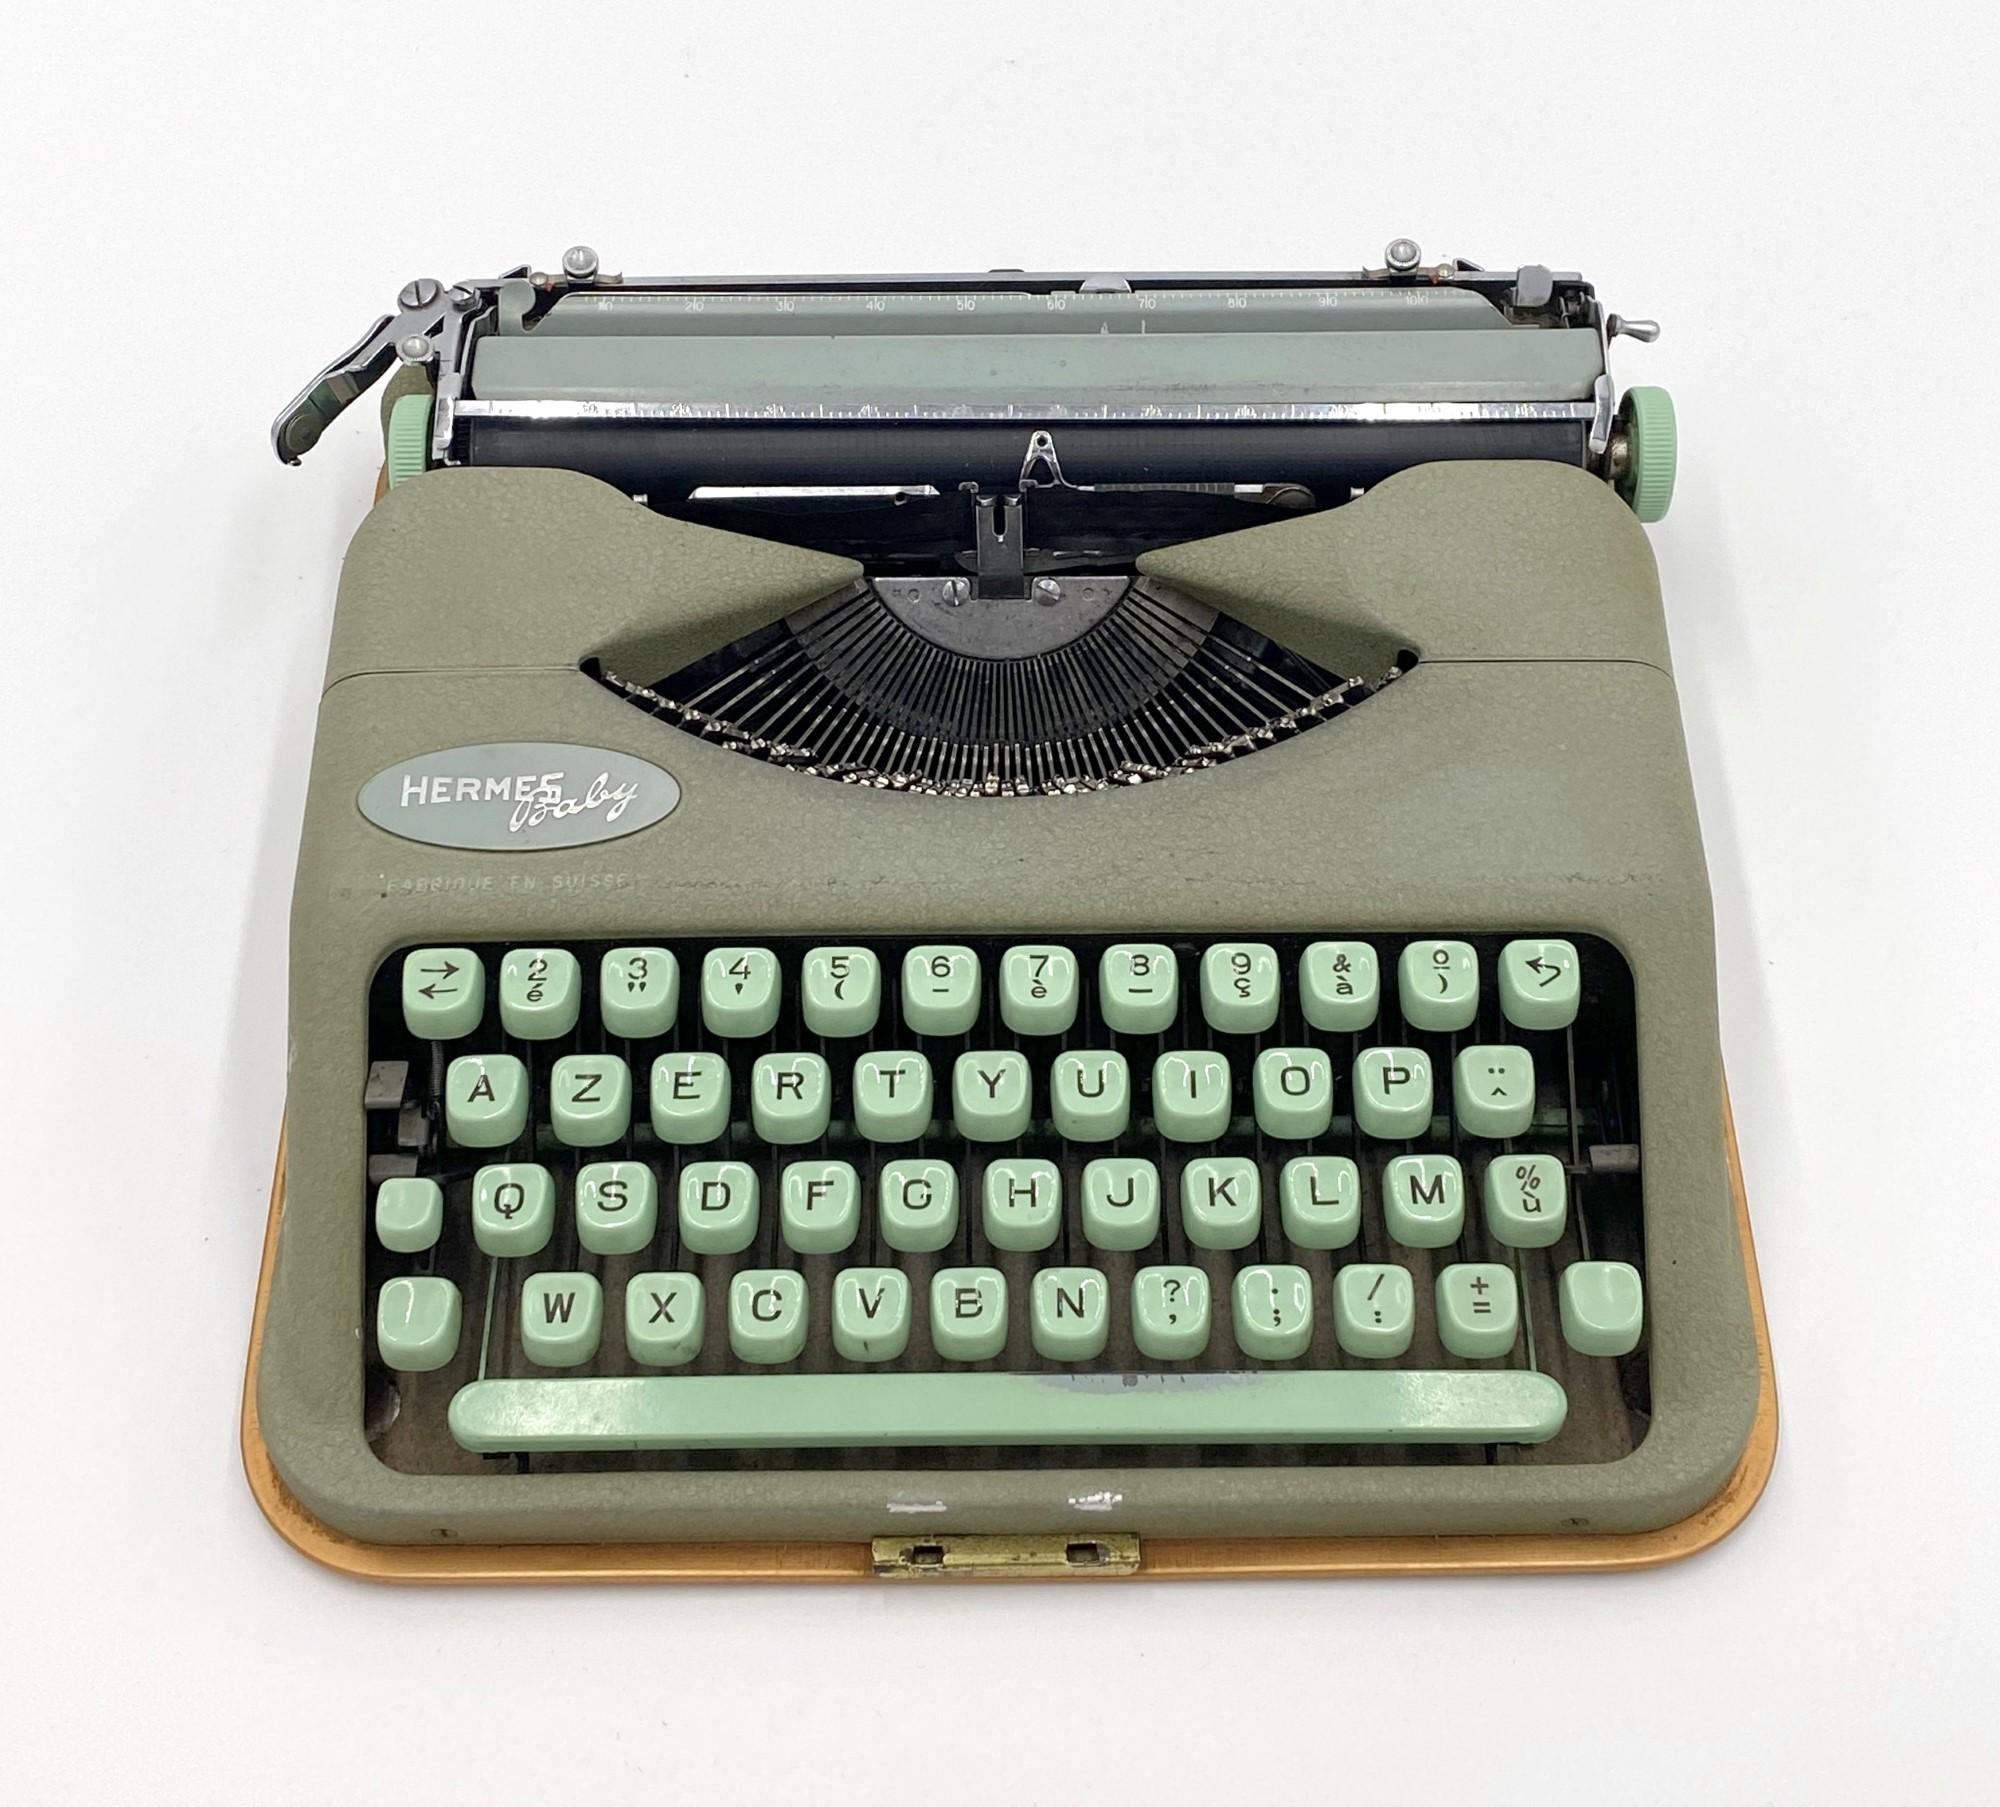 This original 1960s Hermes baby typewriter features a French keyboard. A key for the case, the case and paperwork are included.